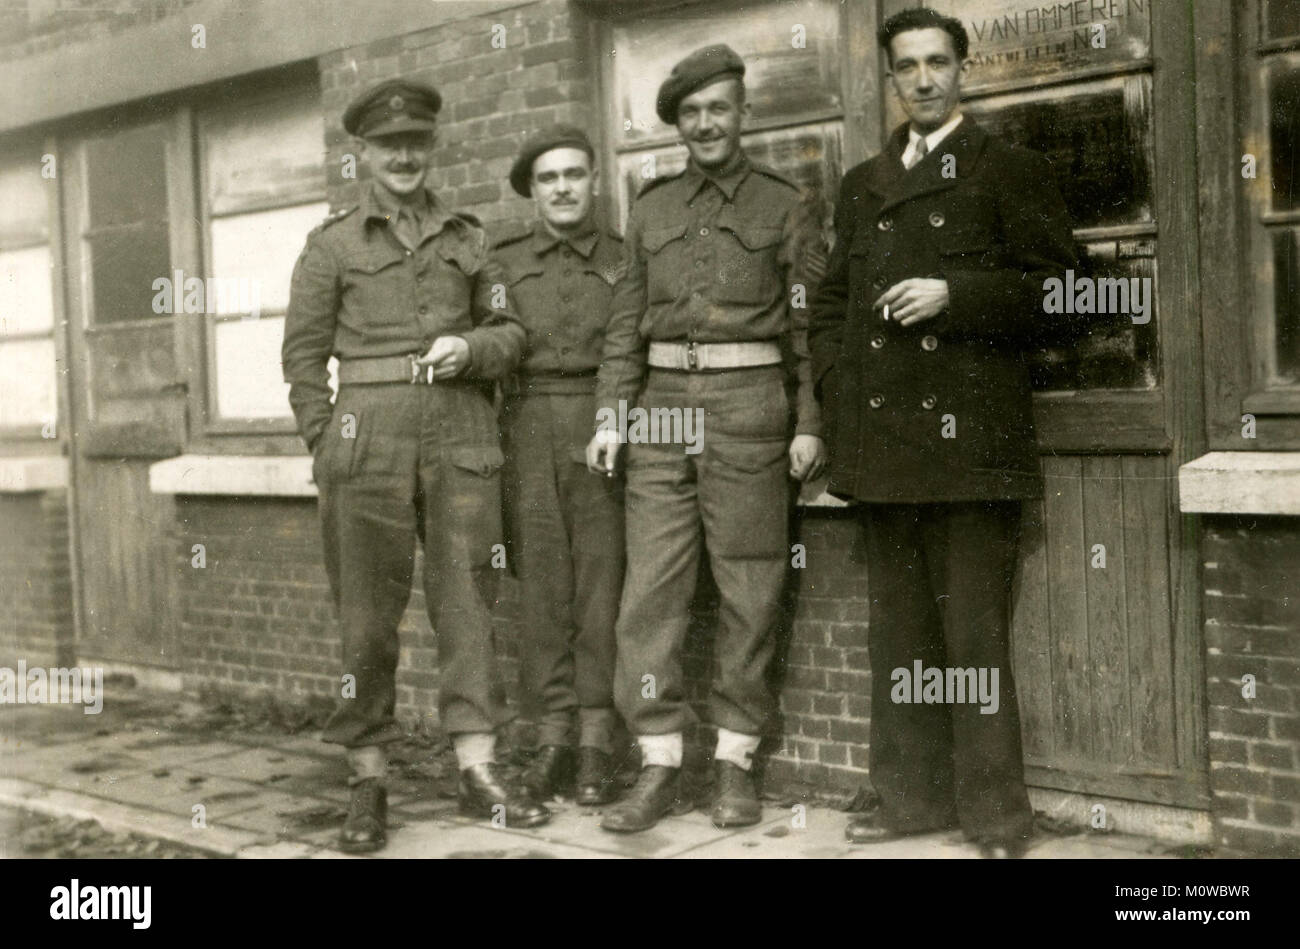 1944, historical, WW2, Ghent, Belguim, three British army officers standing outiside a building with a local civilian enjoying a cigarette. Stock Photo